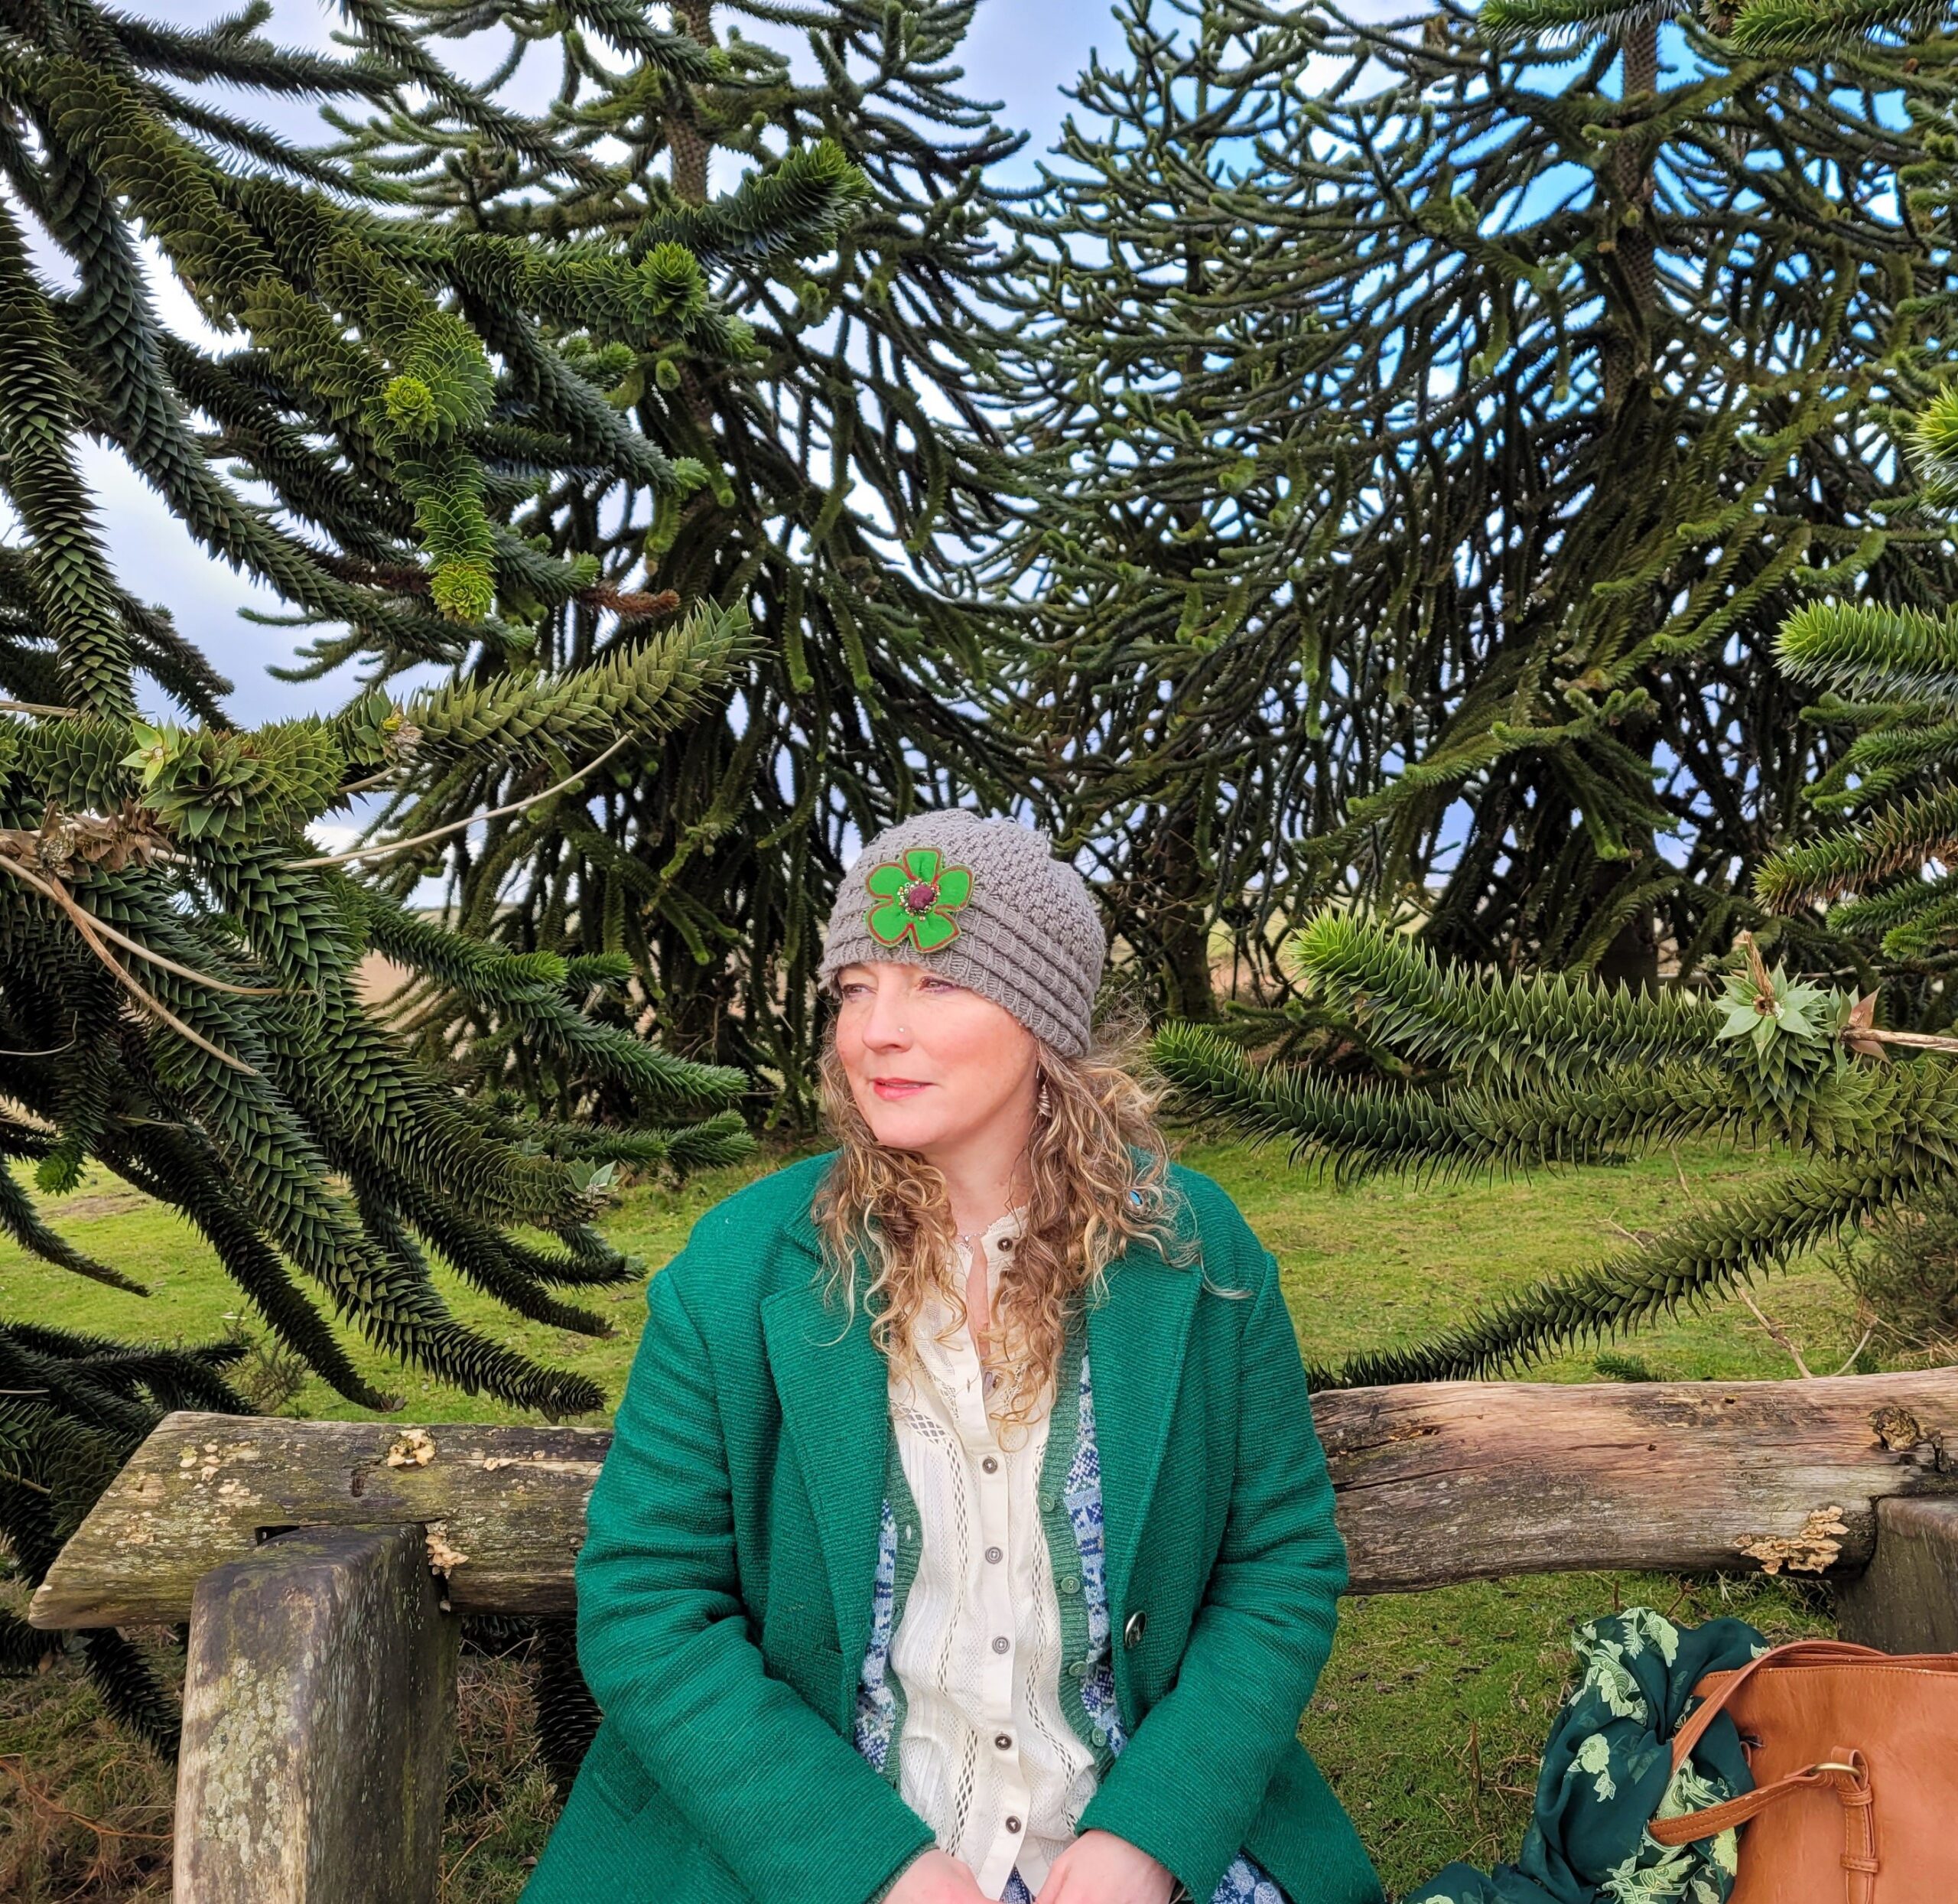 Photograph of a blonde woman, wearing a green cardigan with trees in the background